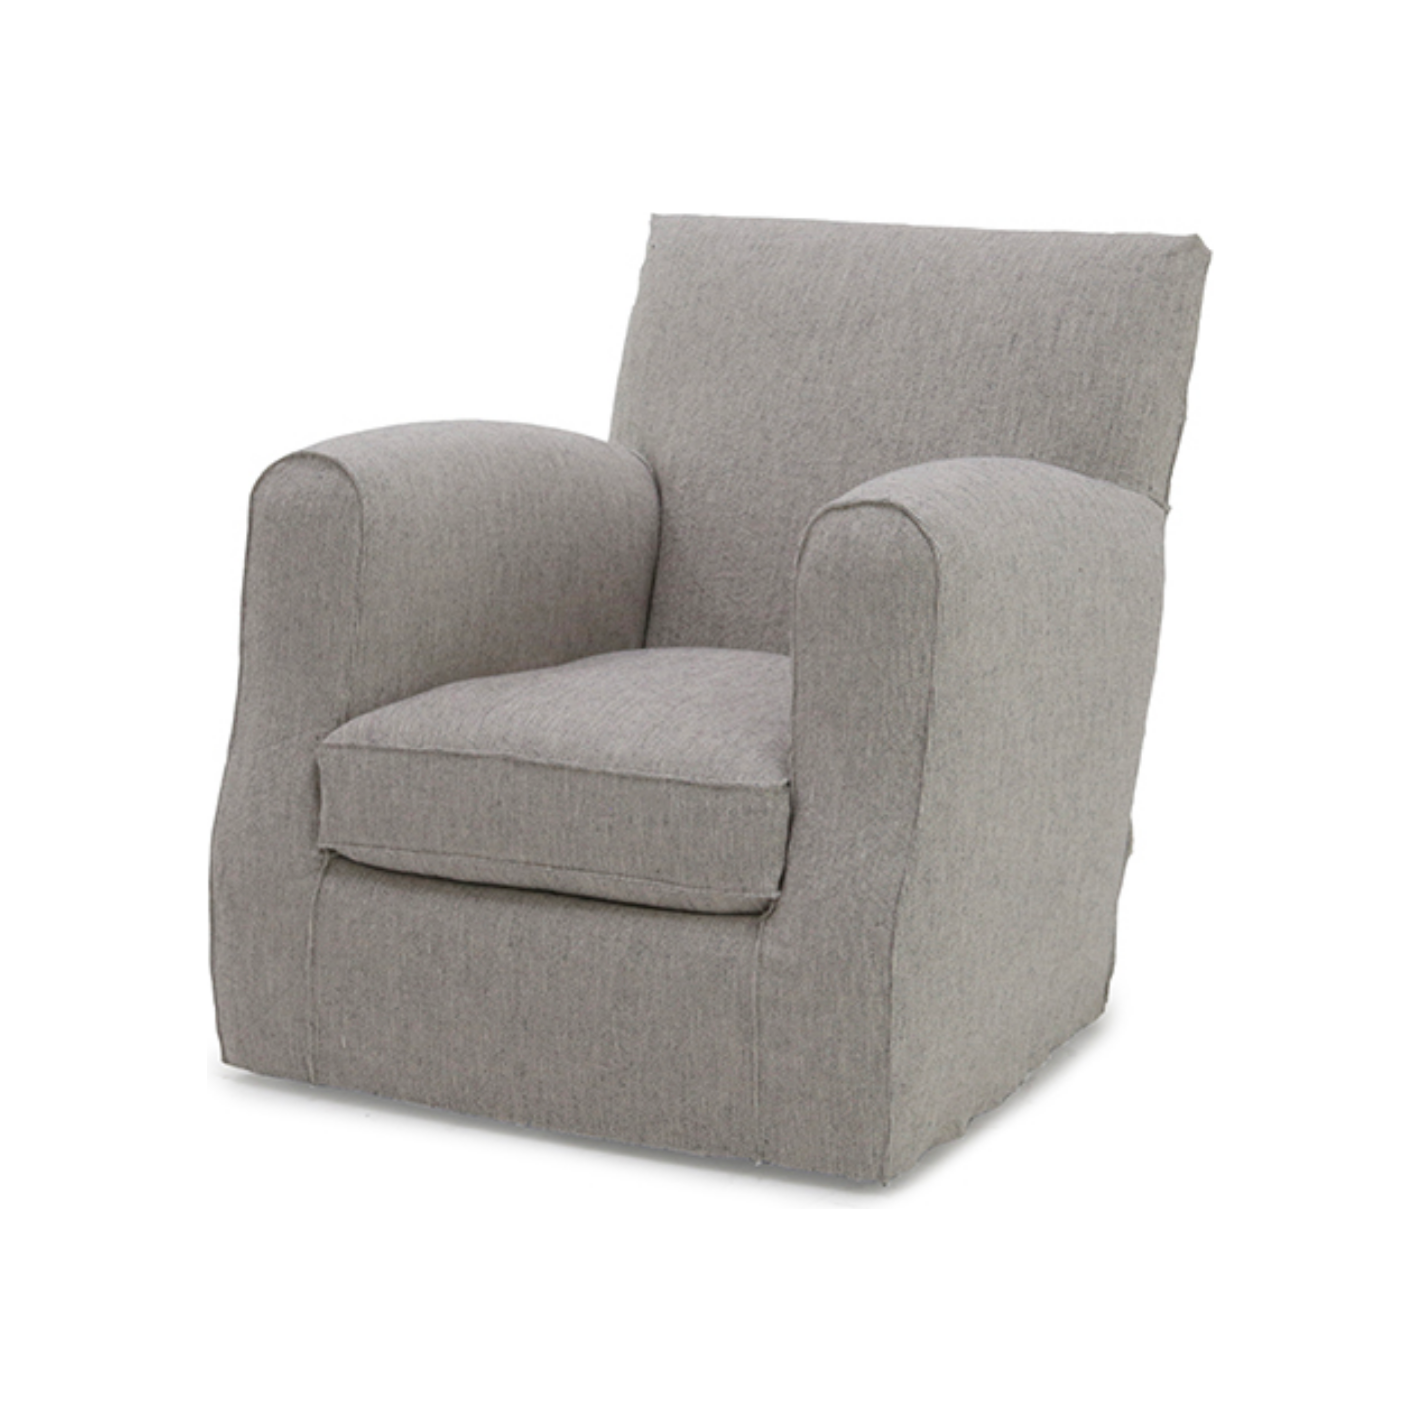 Comfort rules in the Verellen Damien Occasional Chair. Whether it's rocking your baby to sleep or reading your favorite book, this chair will still in the family for years to come. It features:  • Foam Down Wrap Seat Construction • Loose Box Style Seat Cushion • Double Needle • Please Specify Nail Head Selection • Please Specify Leg Finish • Upholstered and Slipcovered Available